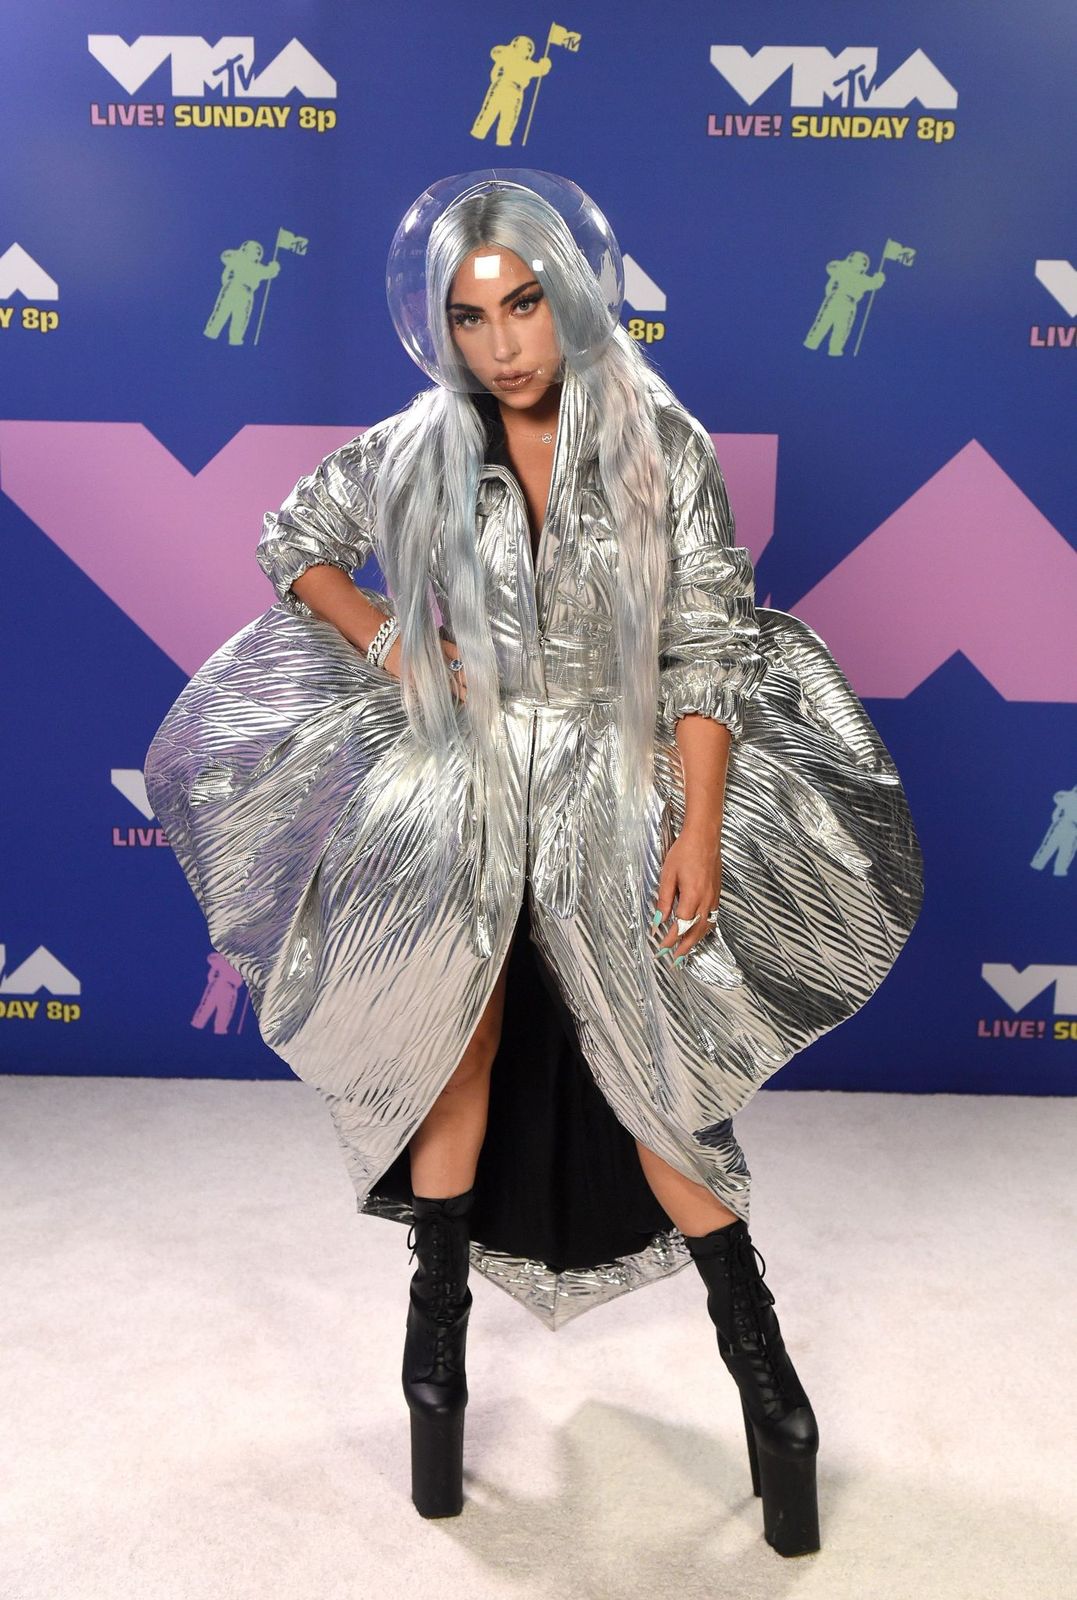 Lady Gaga at the 2020 MTV Video Music Awards, broadcast on Sunday, August 30th 2020. | Photo: Getty Images